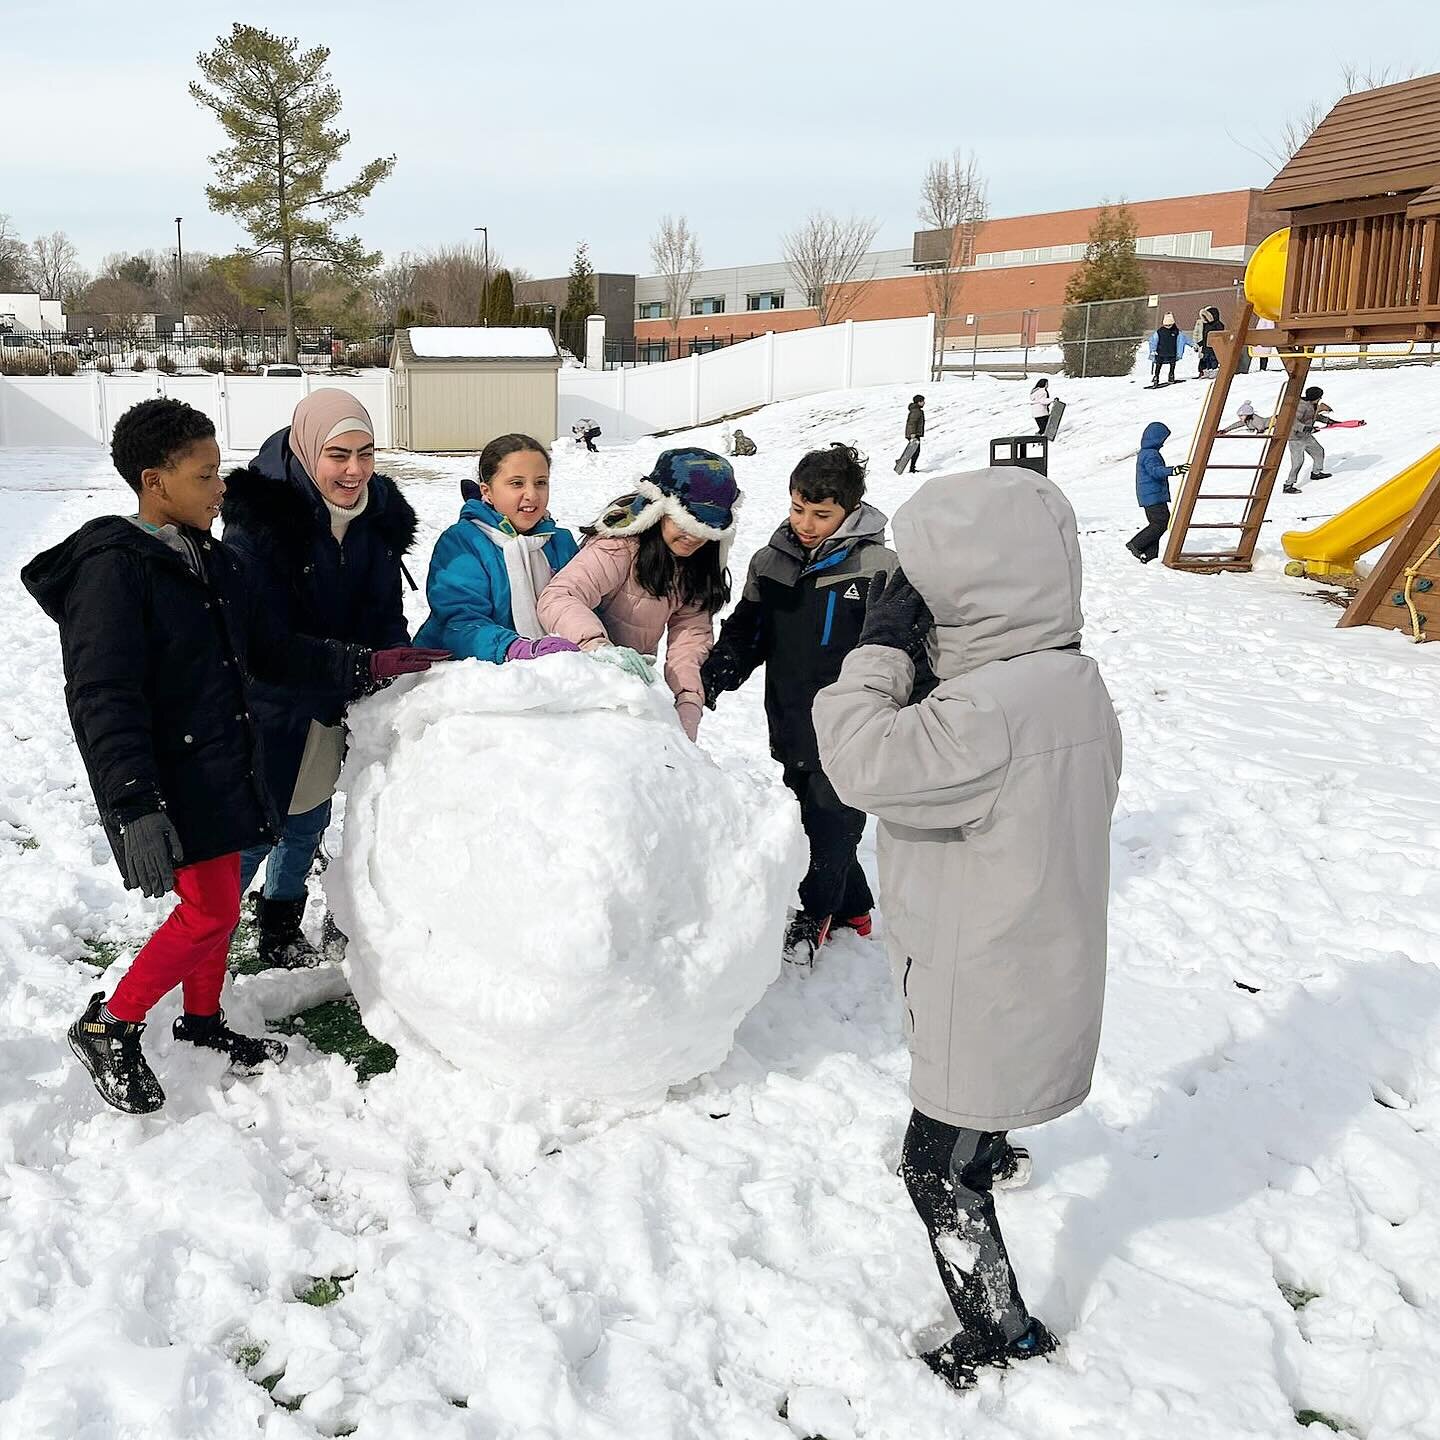 ⛄️ ❄️ What&rsquo;s more fun than playing in the snow? Playing in the snow WITH your classmates and making a snowman taller than you!! ❄️ ⛄️